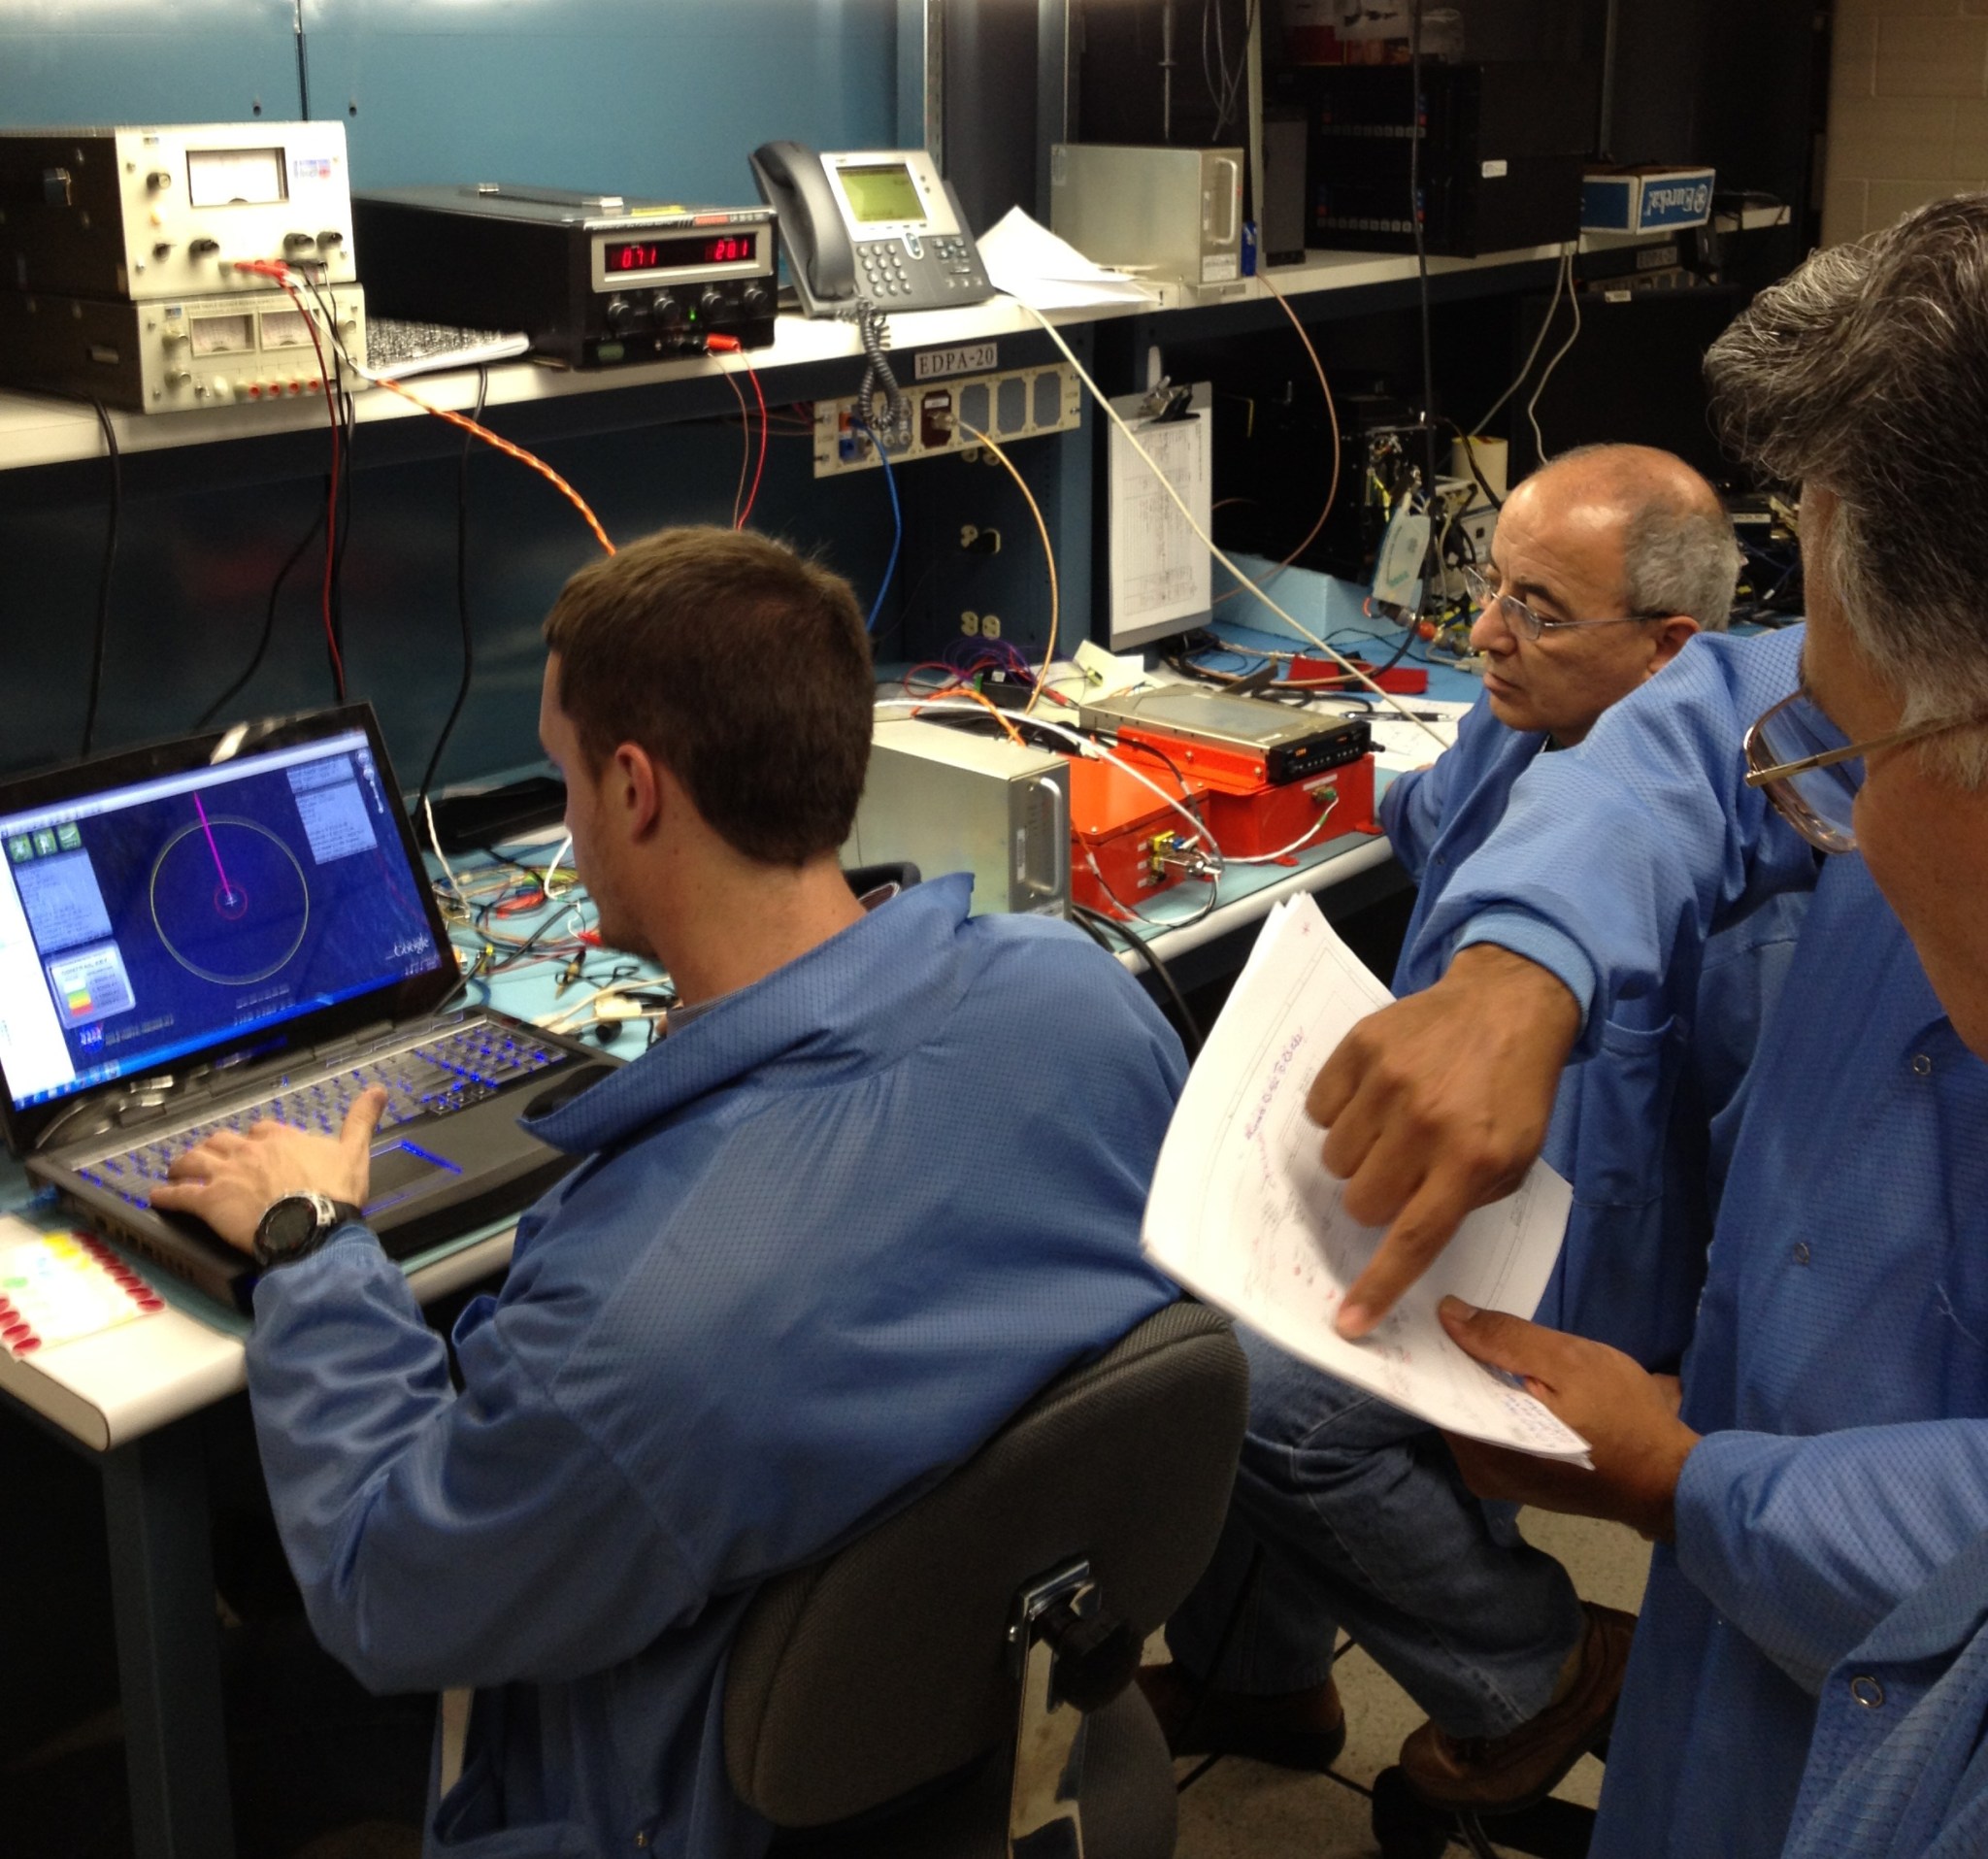 NASA Dryden engineers and technicians bench-check the ADS-B unit and software interface.